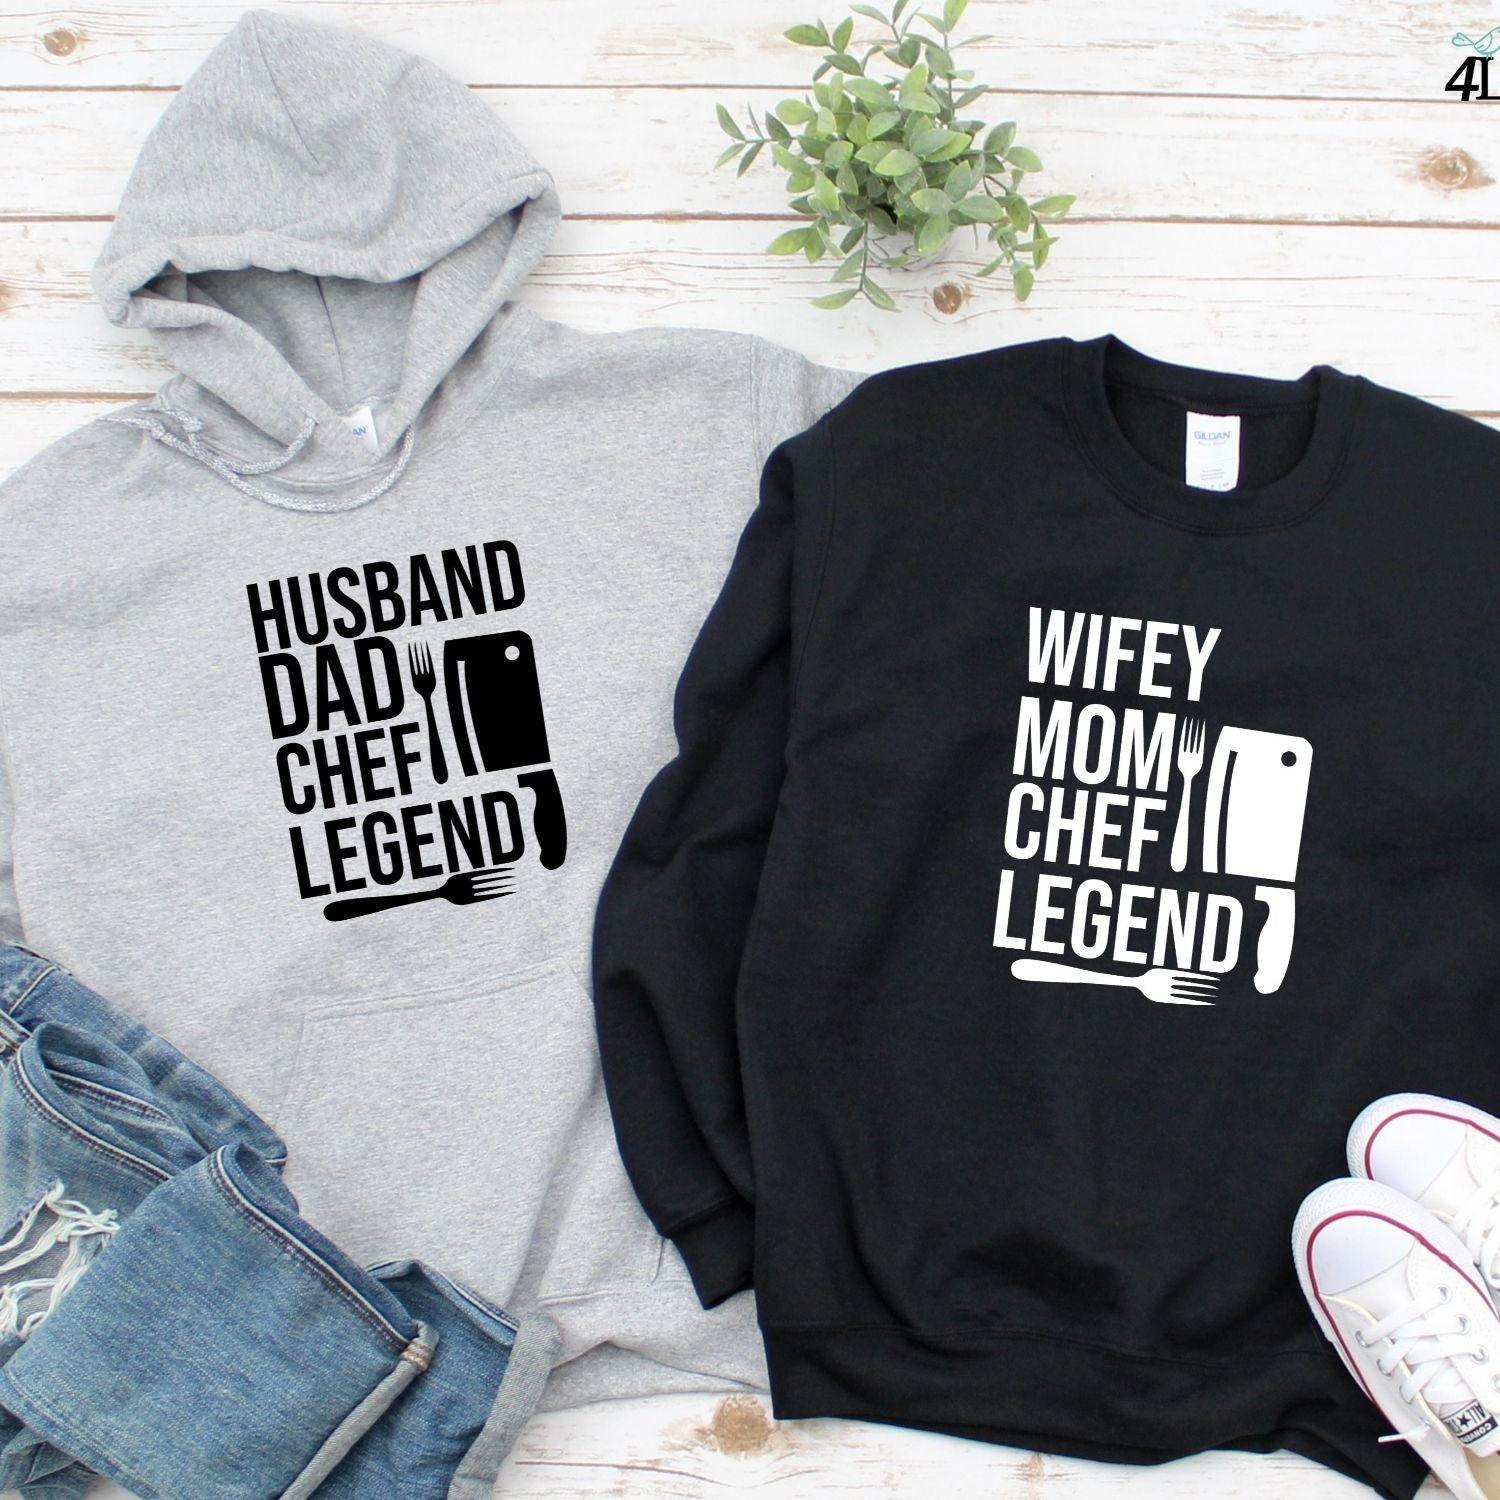 Chef Legend, Husband/Wife, Dad/Mom: Fabulous Family Matching Outfits Set - 4Lovebirds